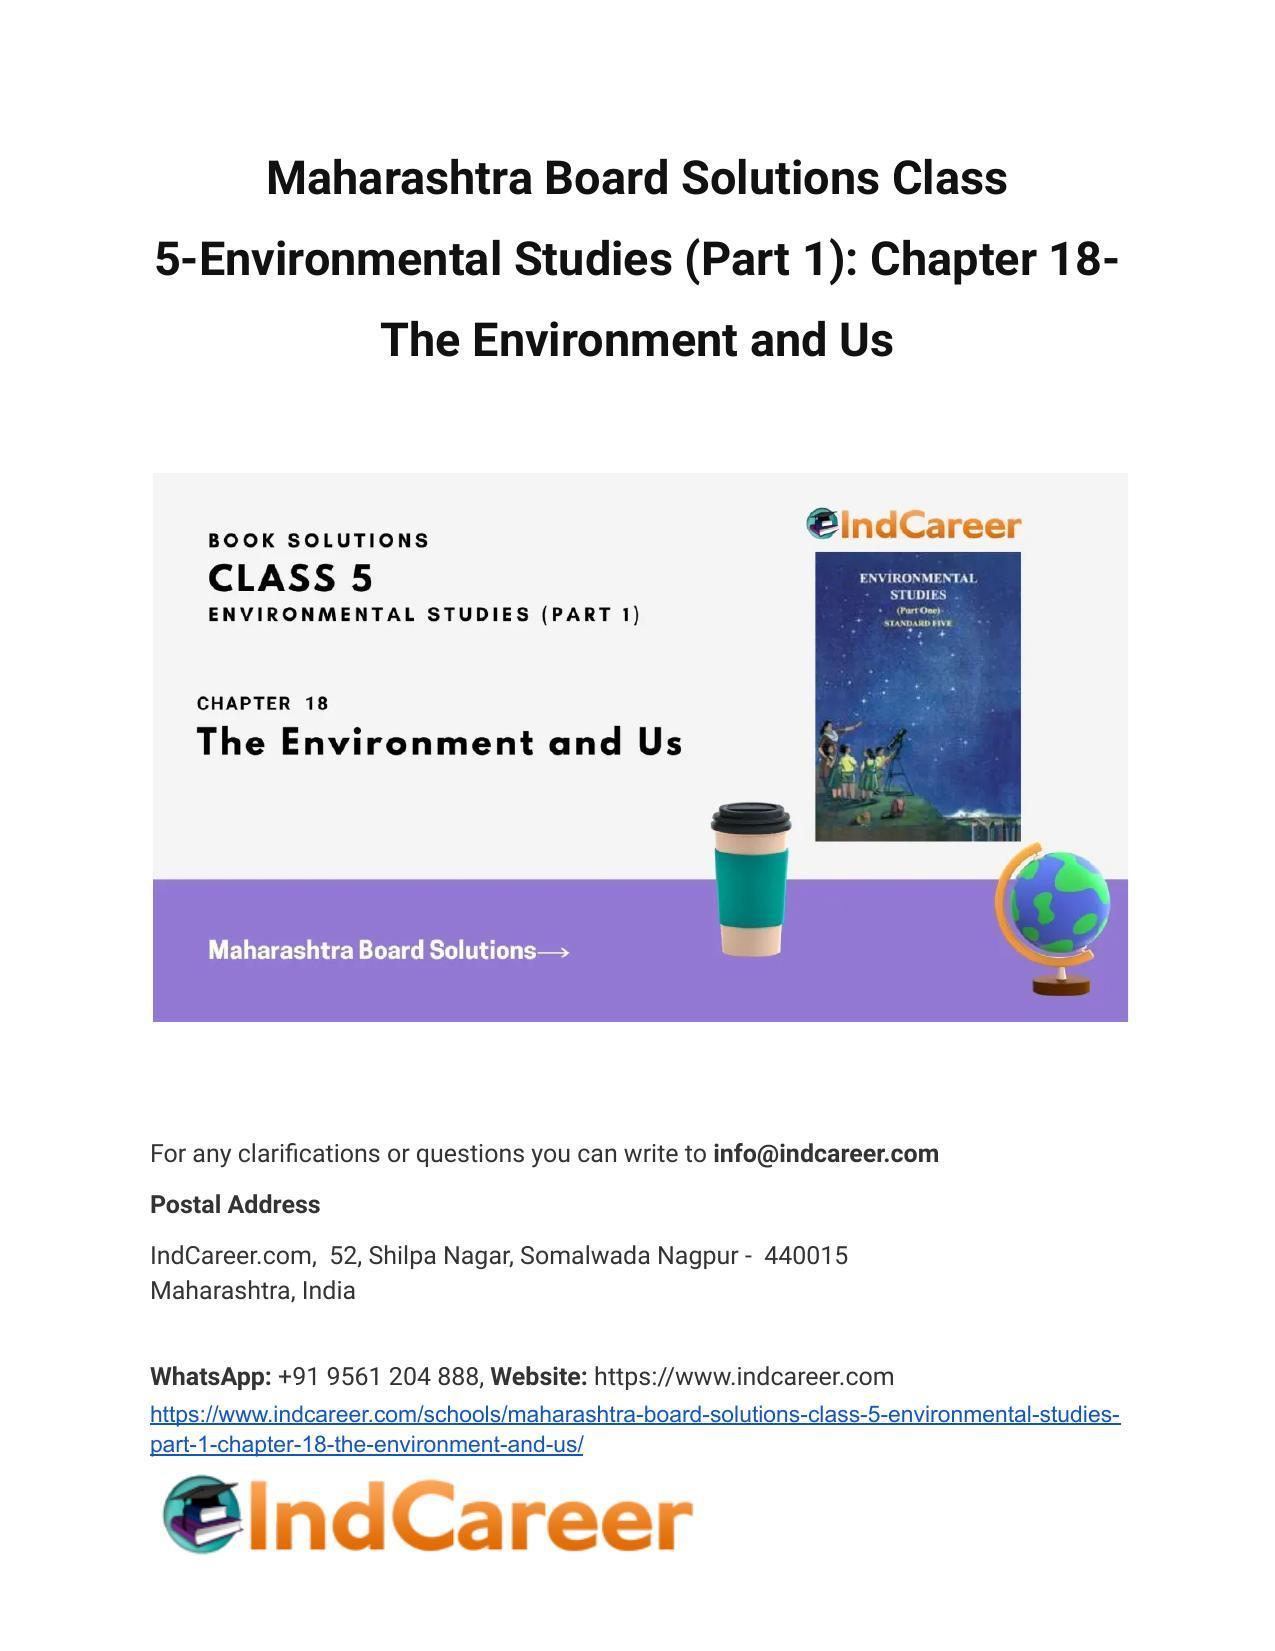 Maharashtra Board Solutions Class 5-Environmental Studies (Part 1): Chapter 18- The Environment and Us - Page 1